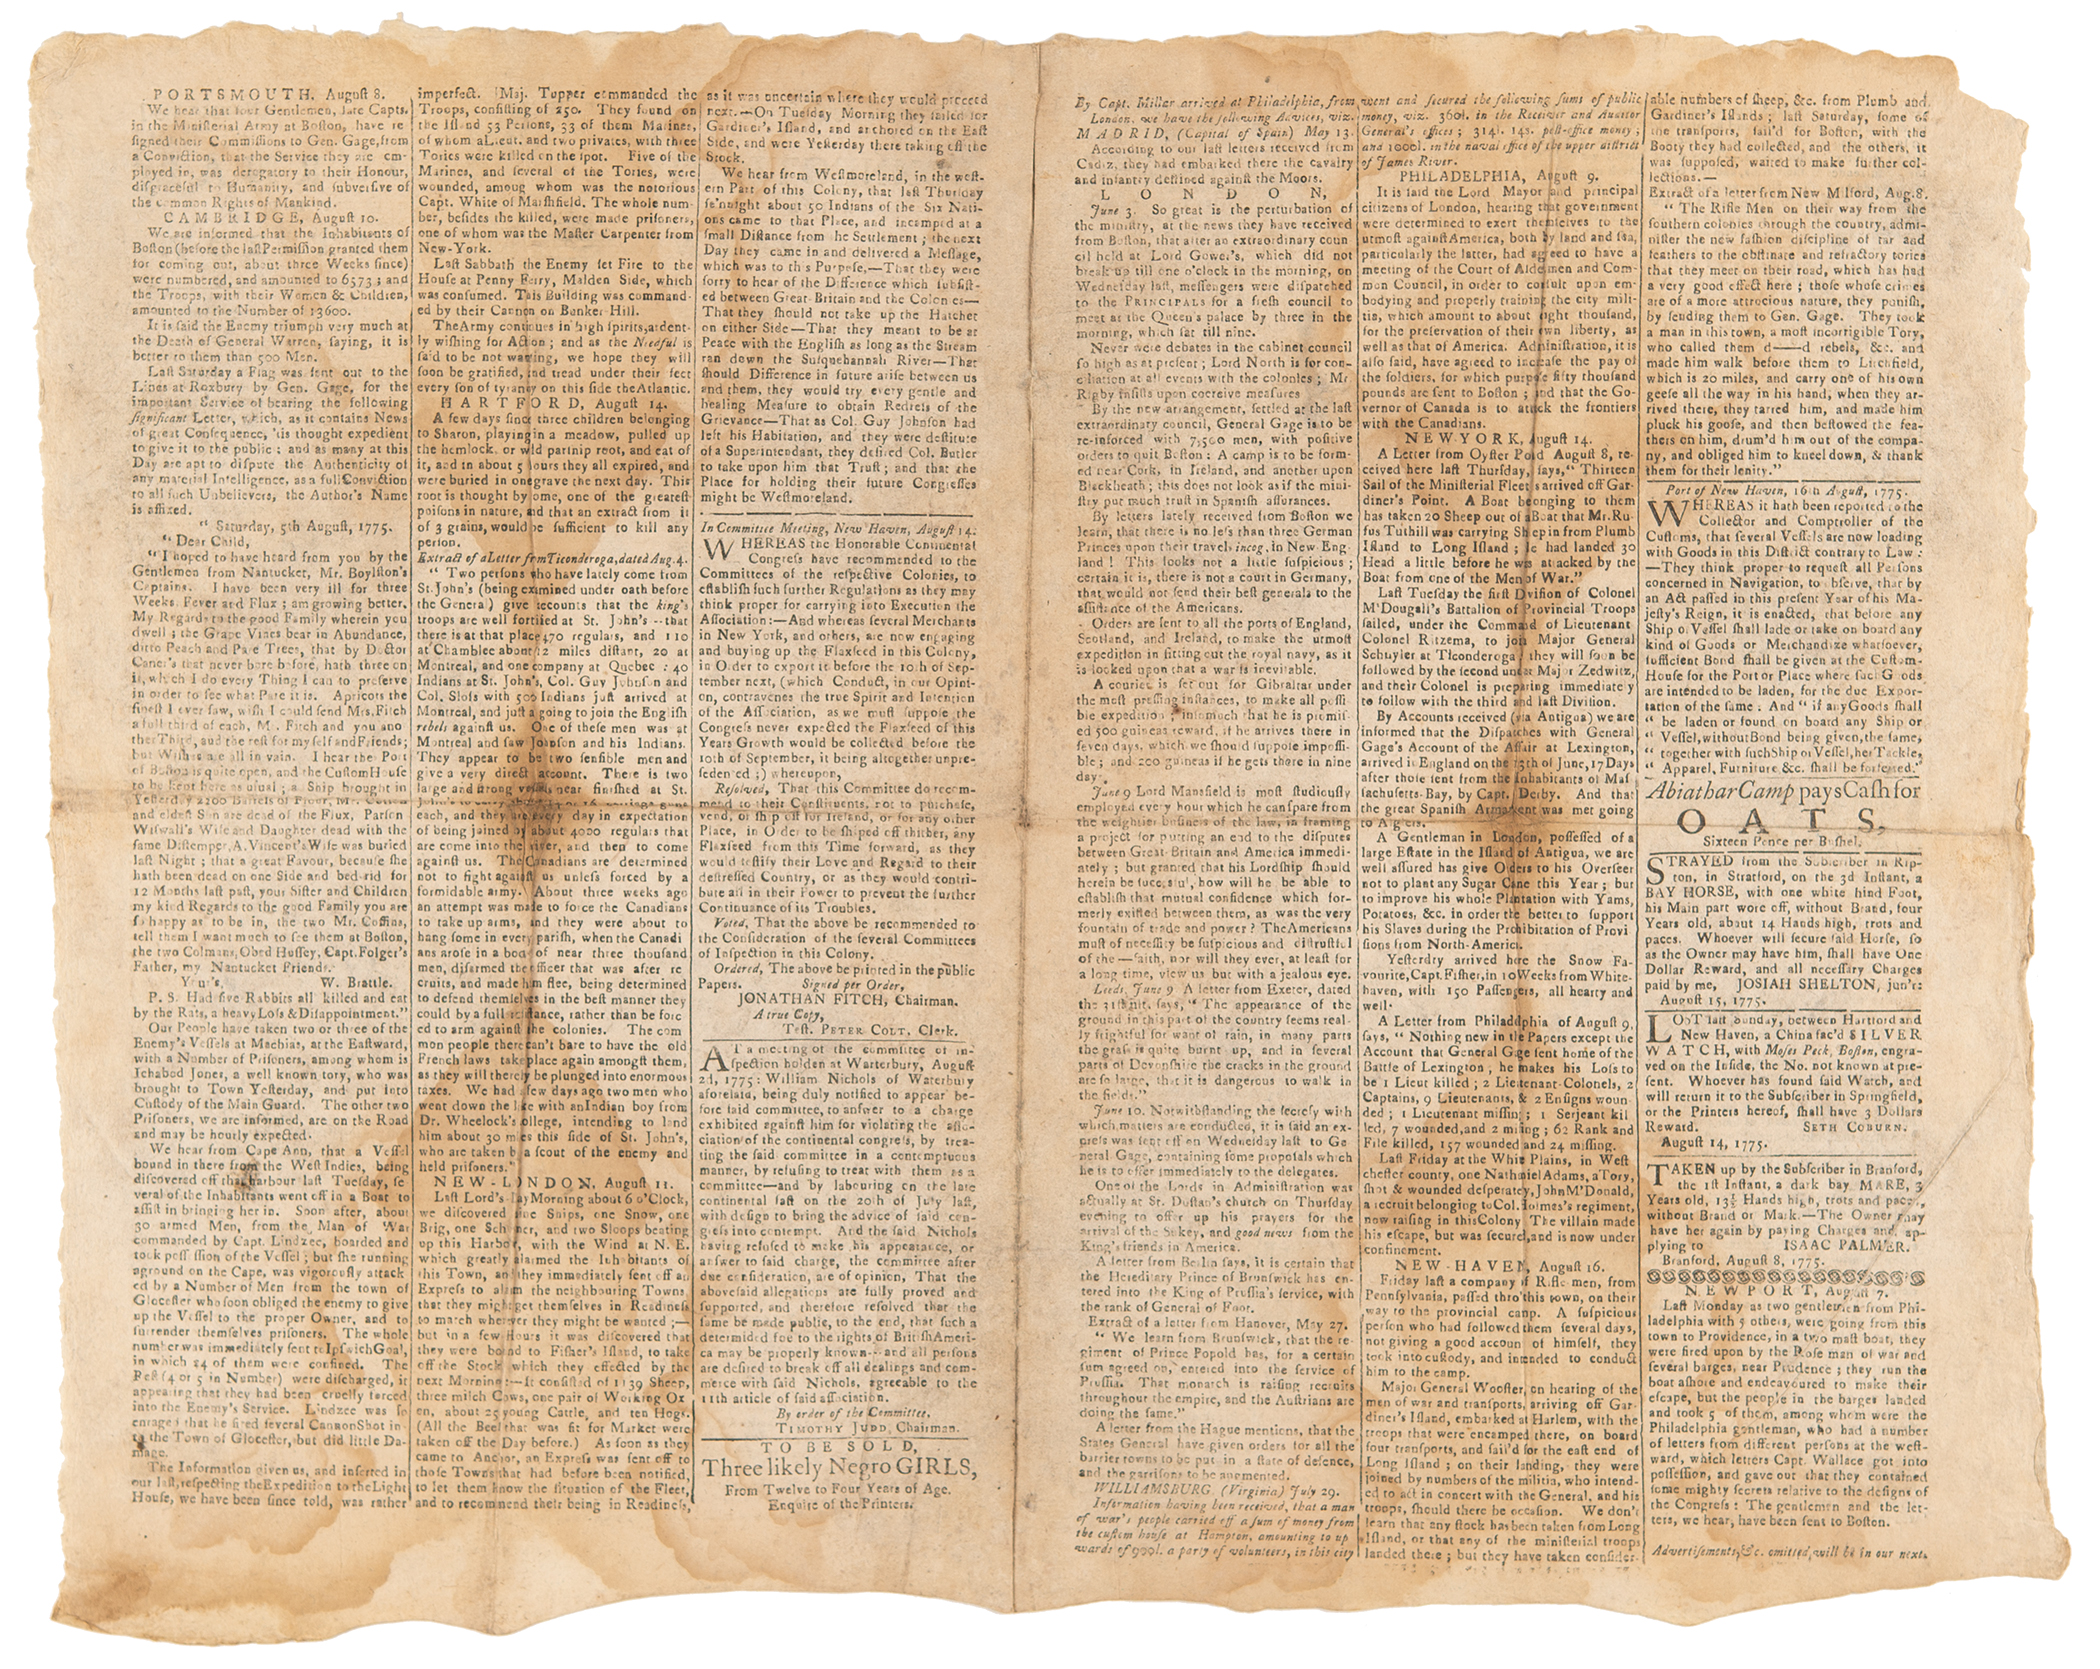 Lot #281 Continental Congress' 1775 Address 'To the People of Ireland,' Published in the Connecticut Journal - Image 2